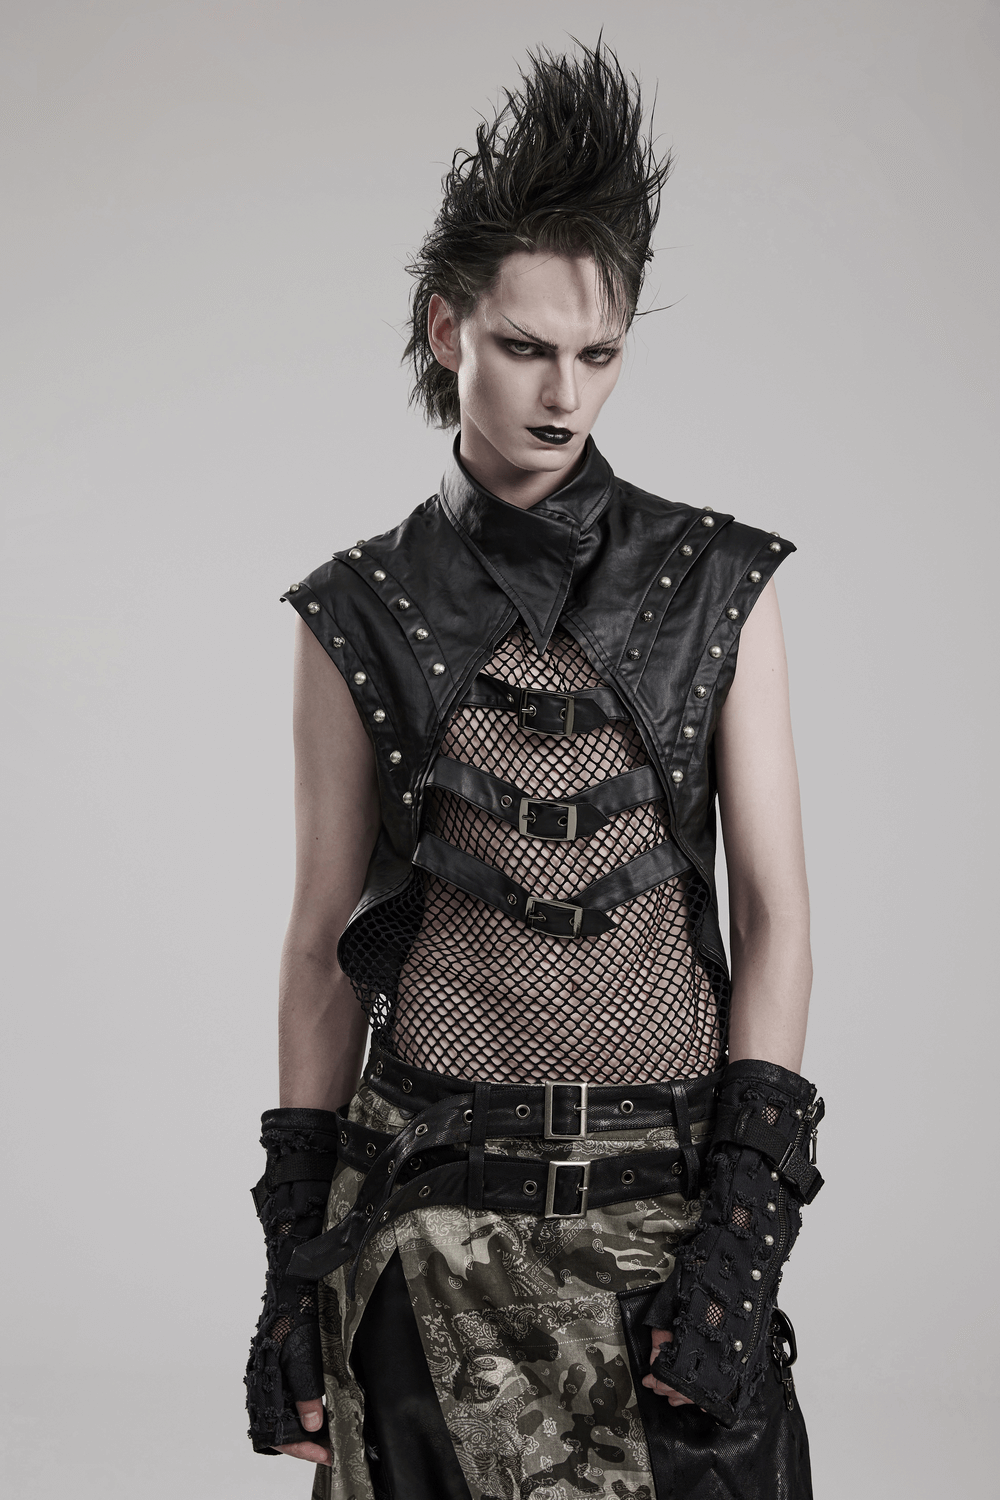 Stylish Men's Gothic Mesh Top with Rivets and Buckles